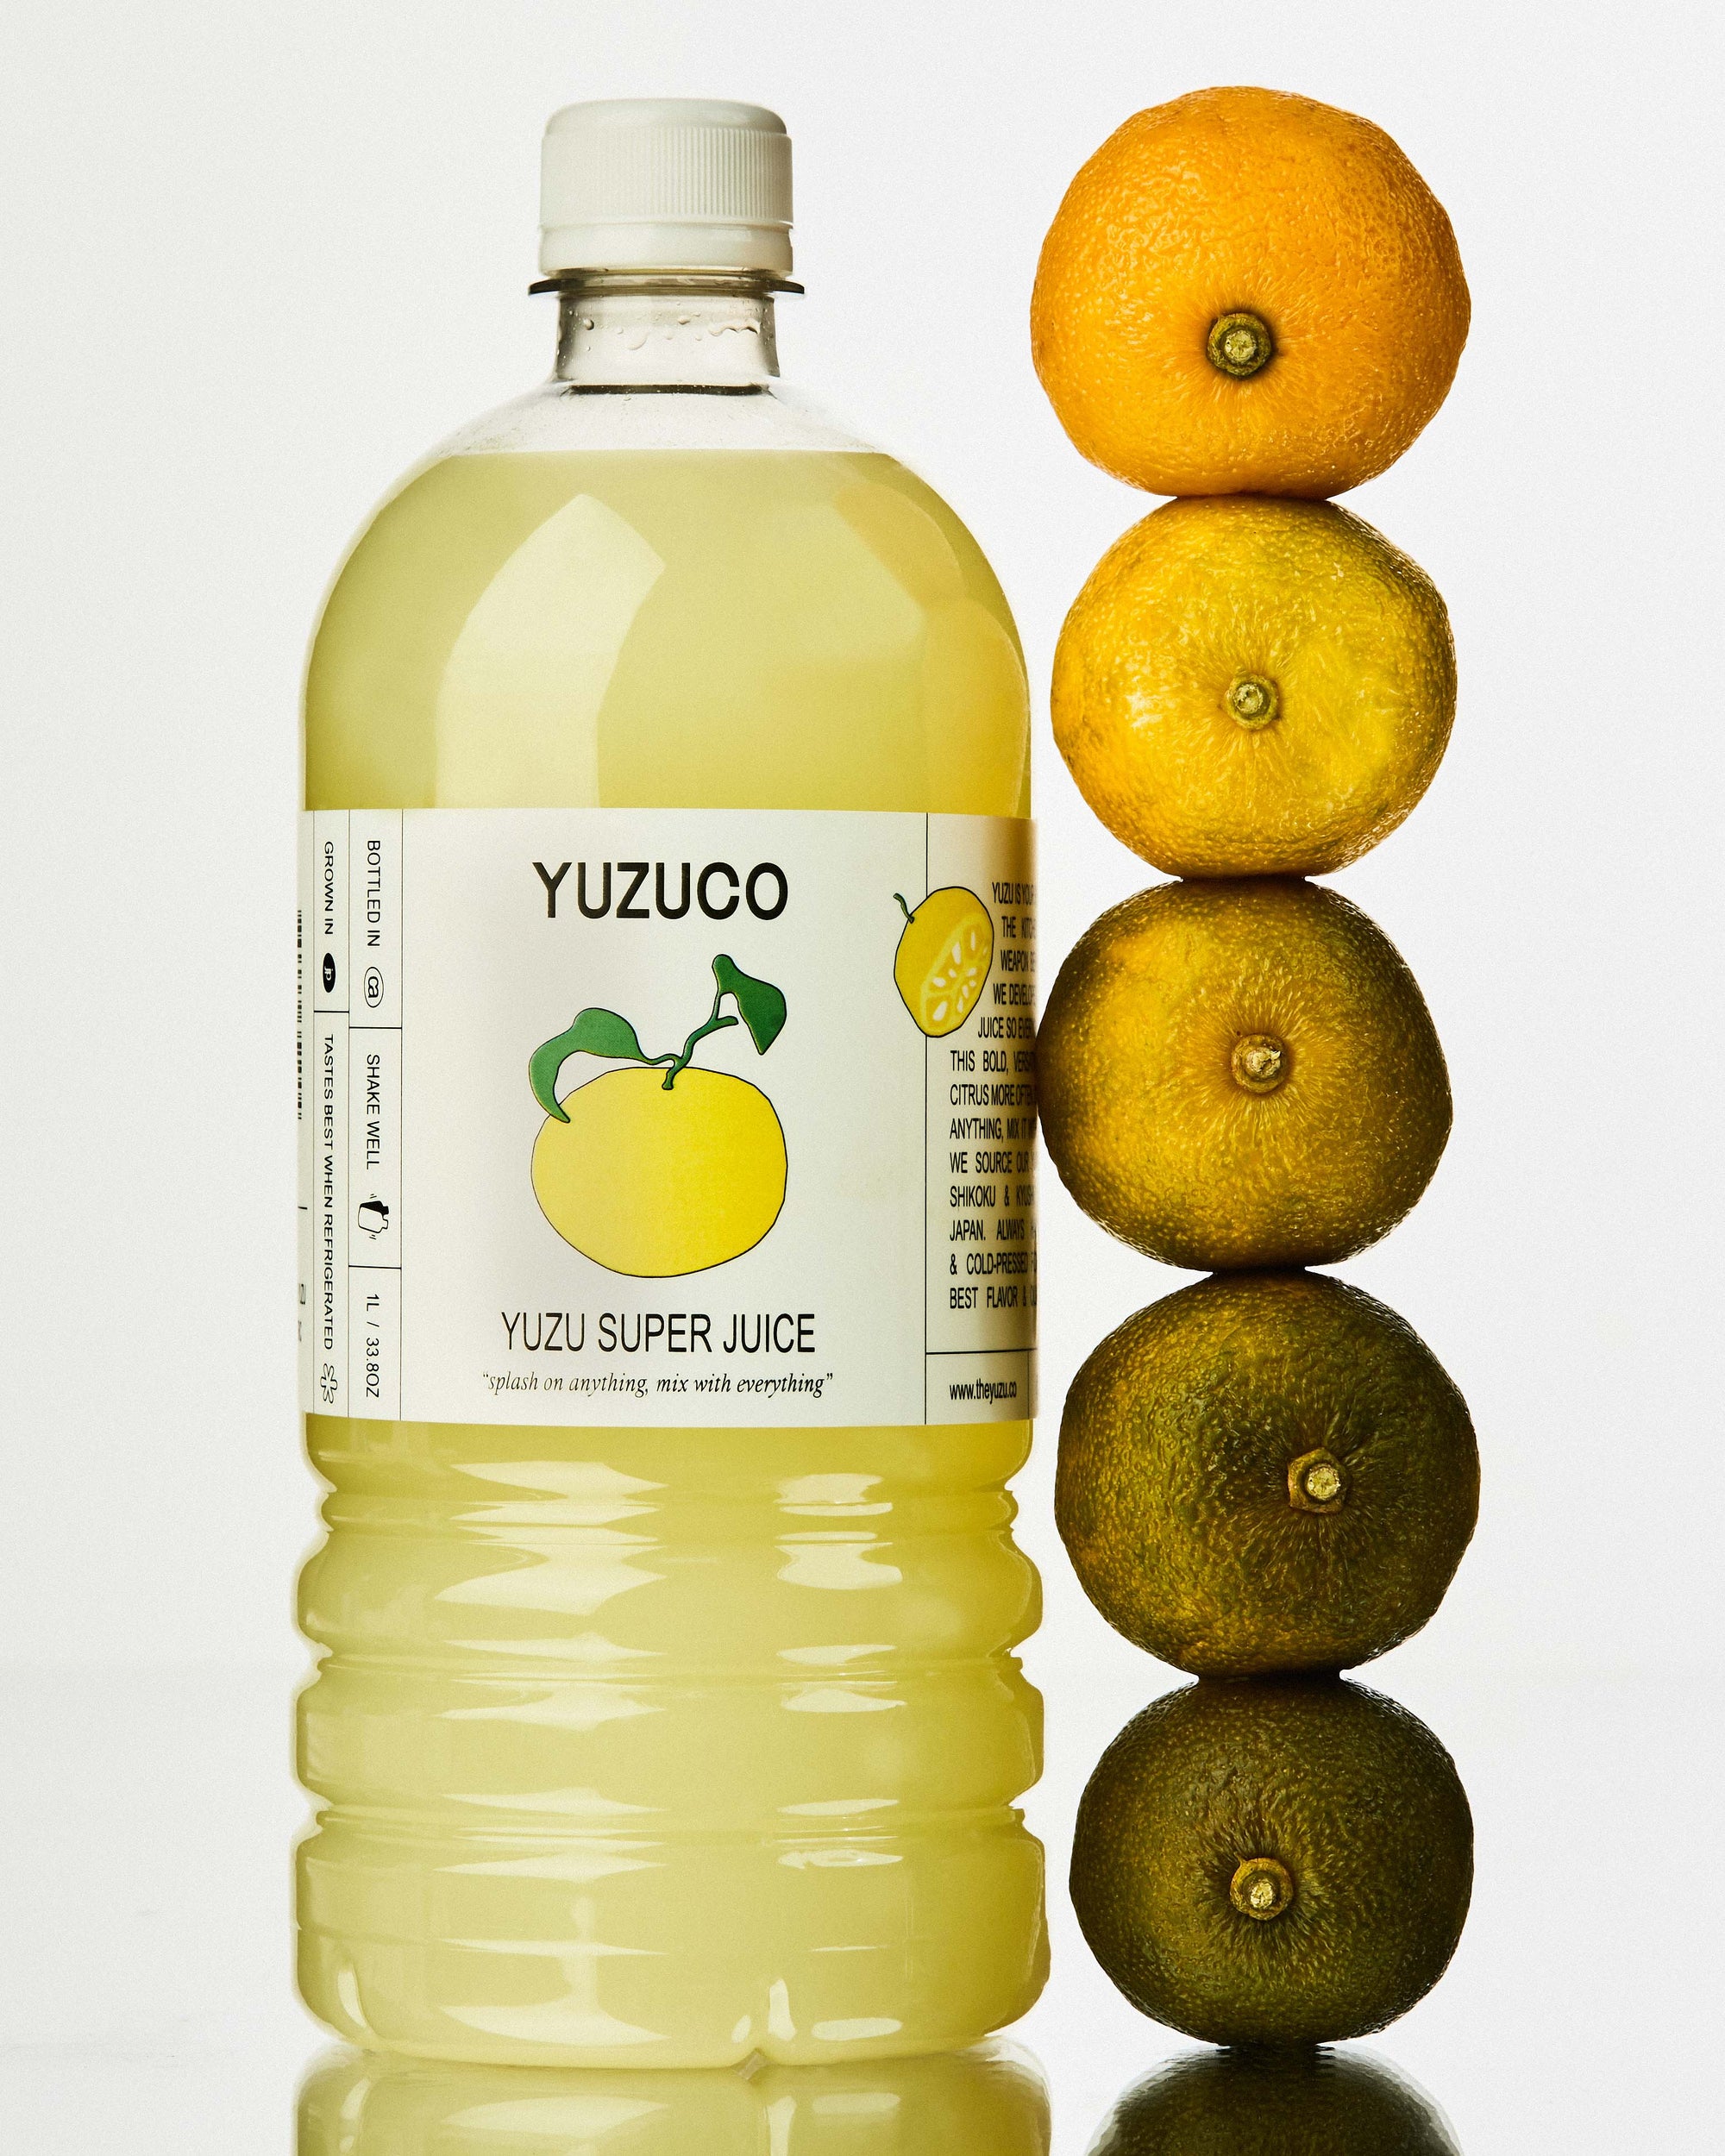 yuzuco yuzu super juice next to yuzu fruit at different stages of ripeness